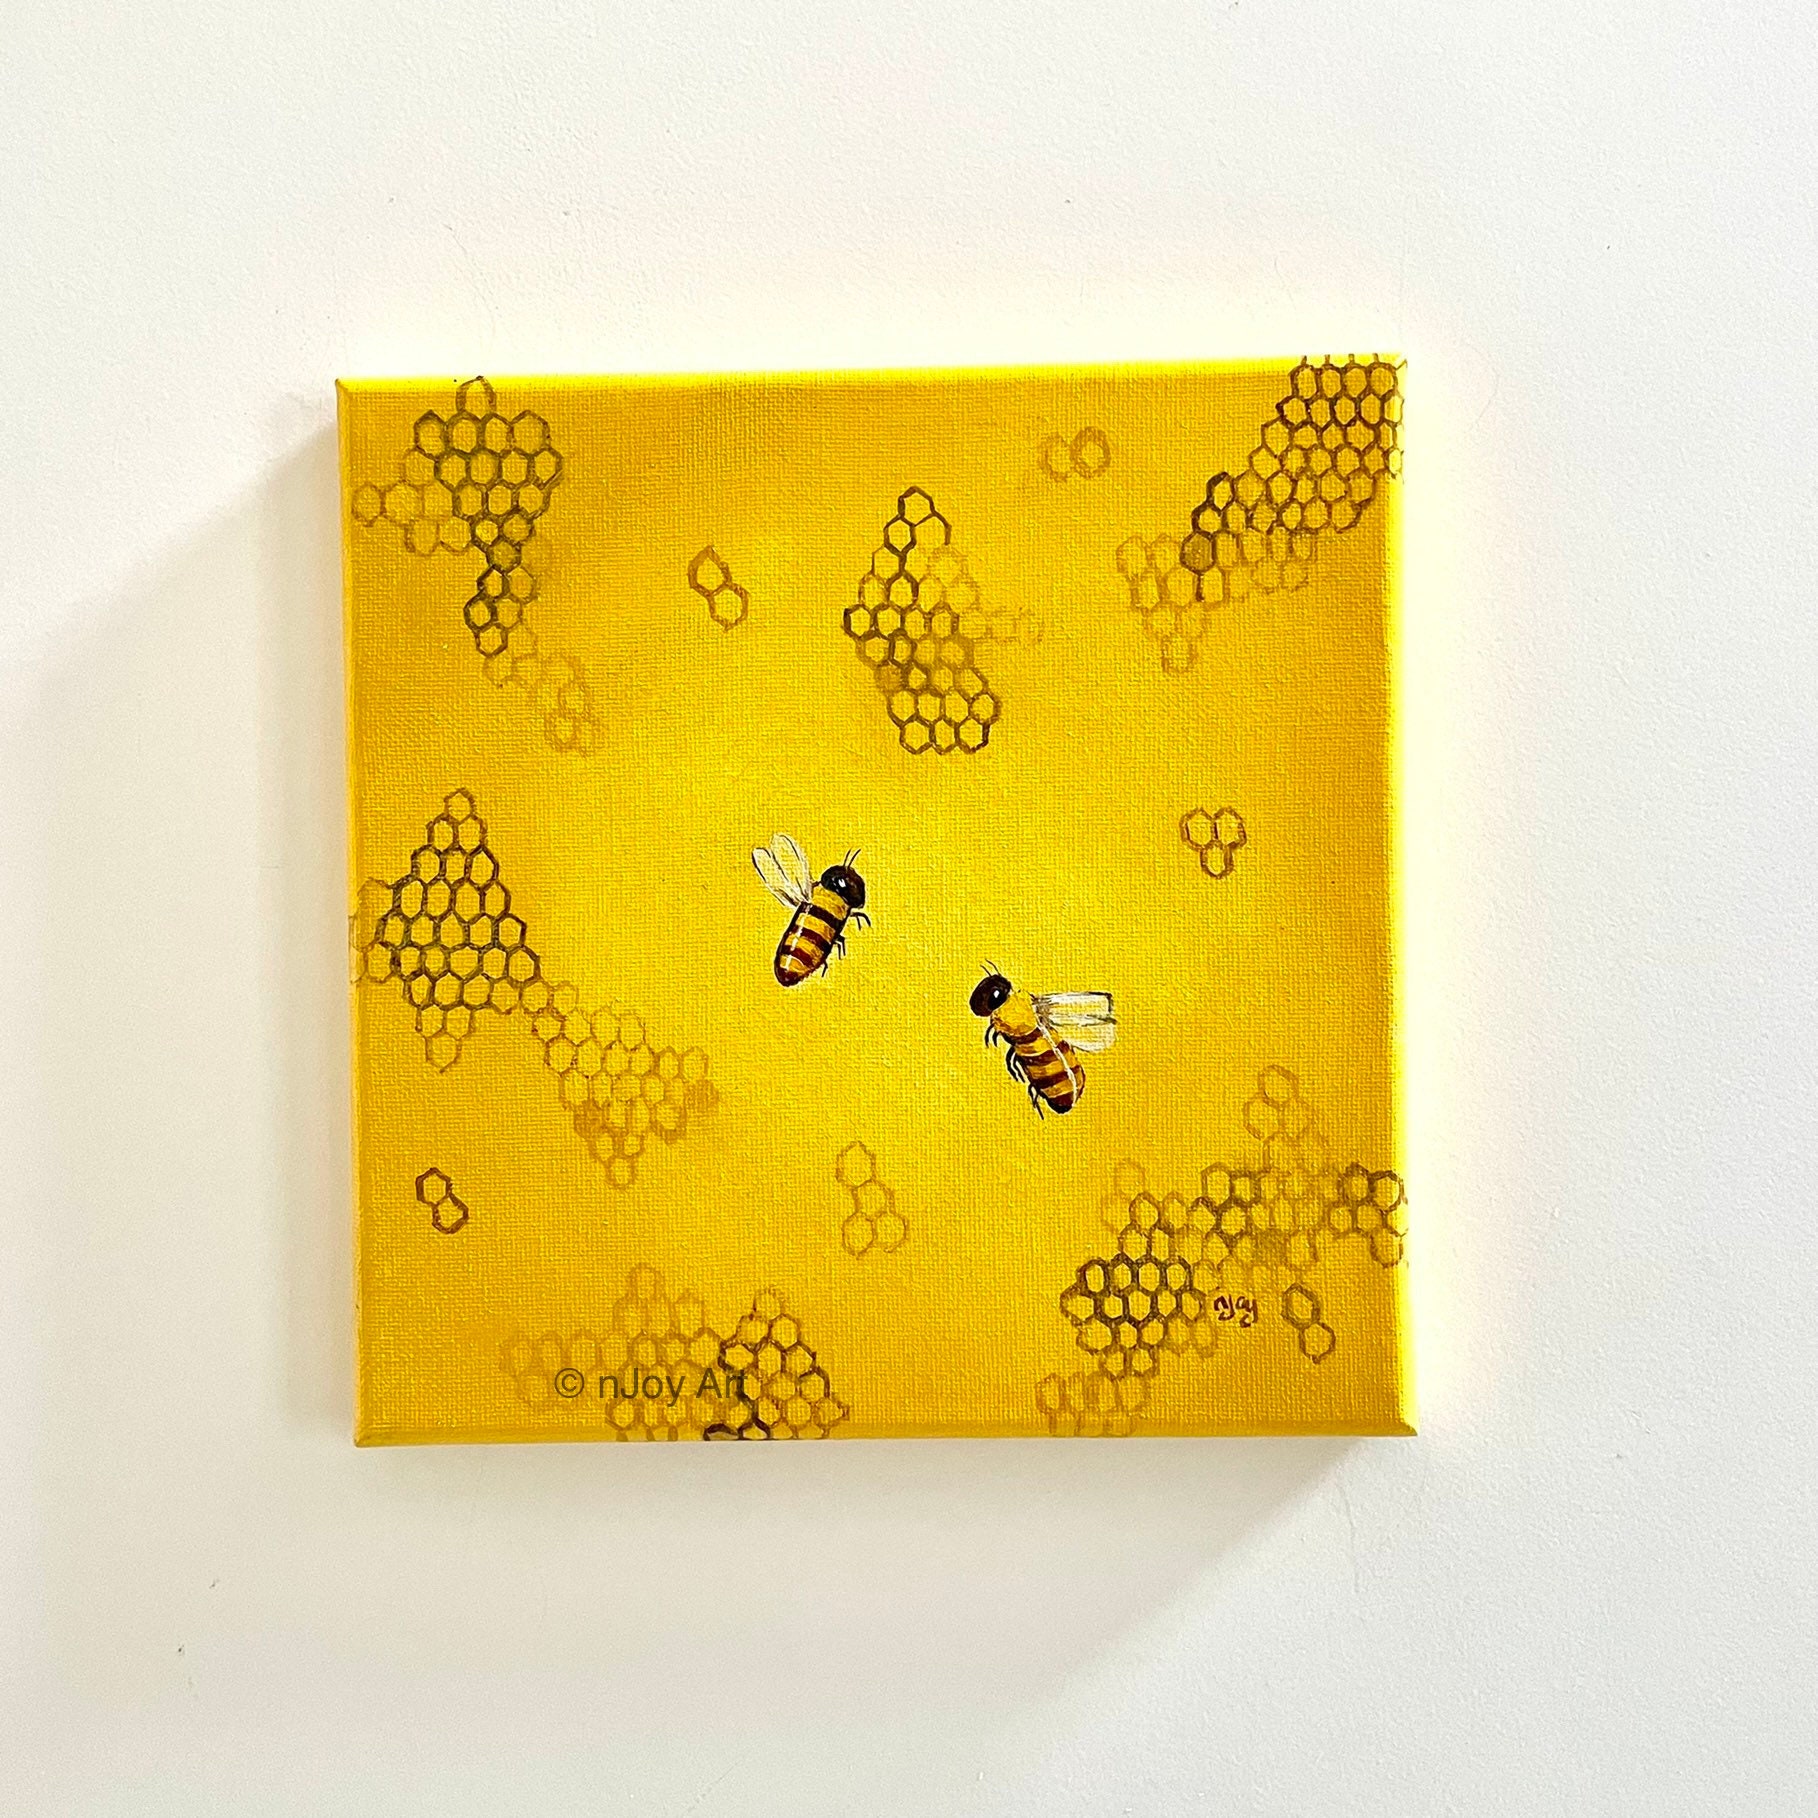 Honeycomb Honey Bees, 8 Inch Acrylic Canvas Painting, Fully Painted Edges,  Ready to Hang. 